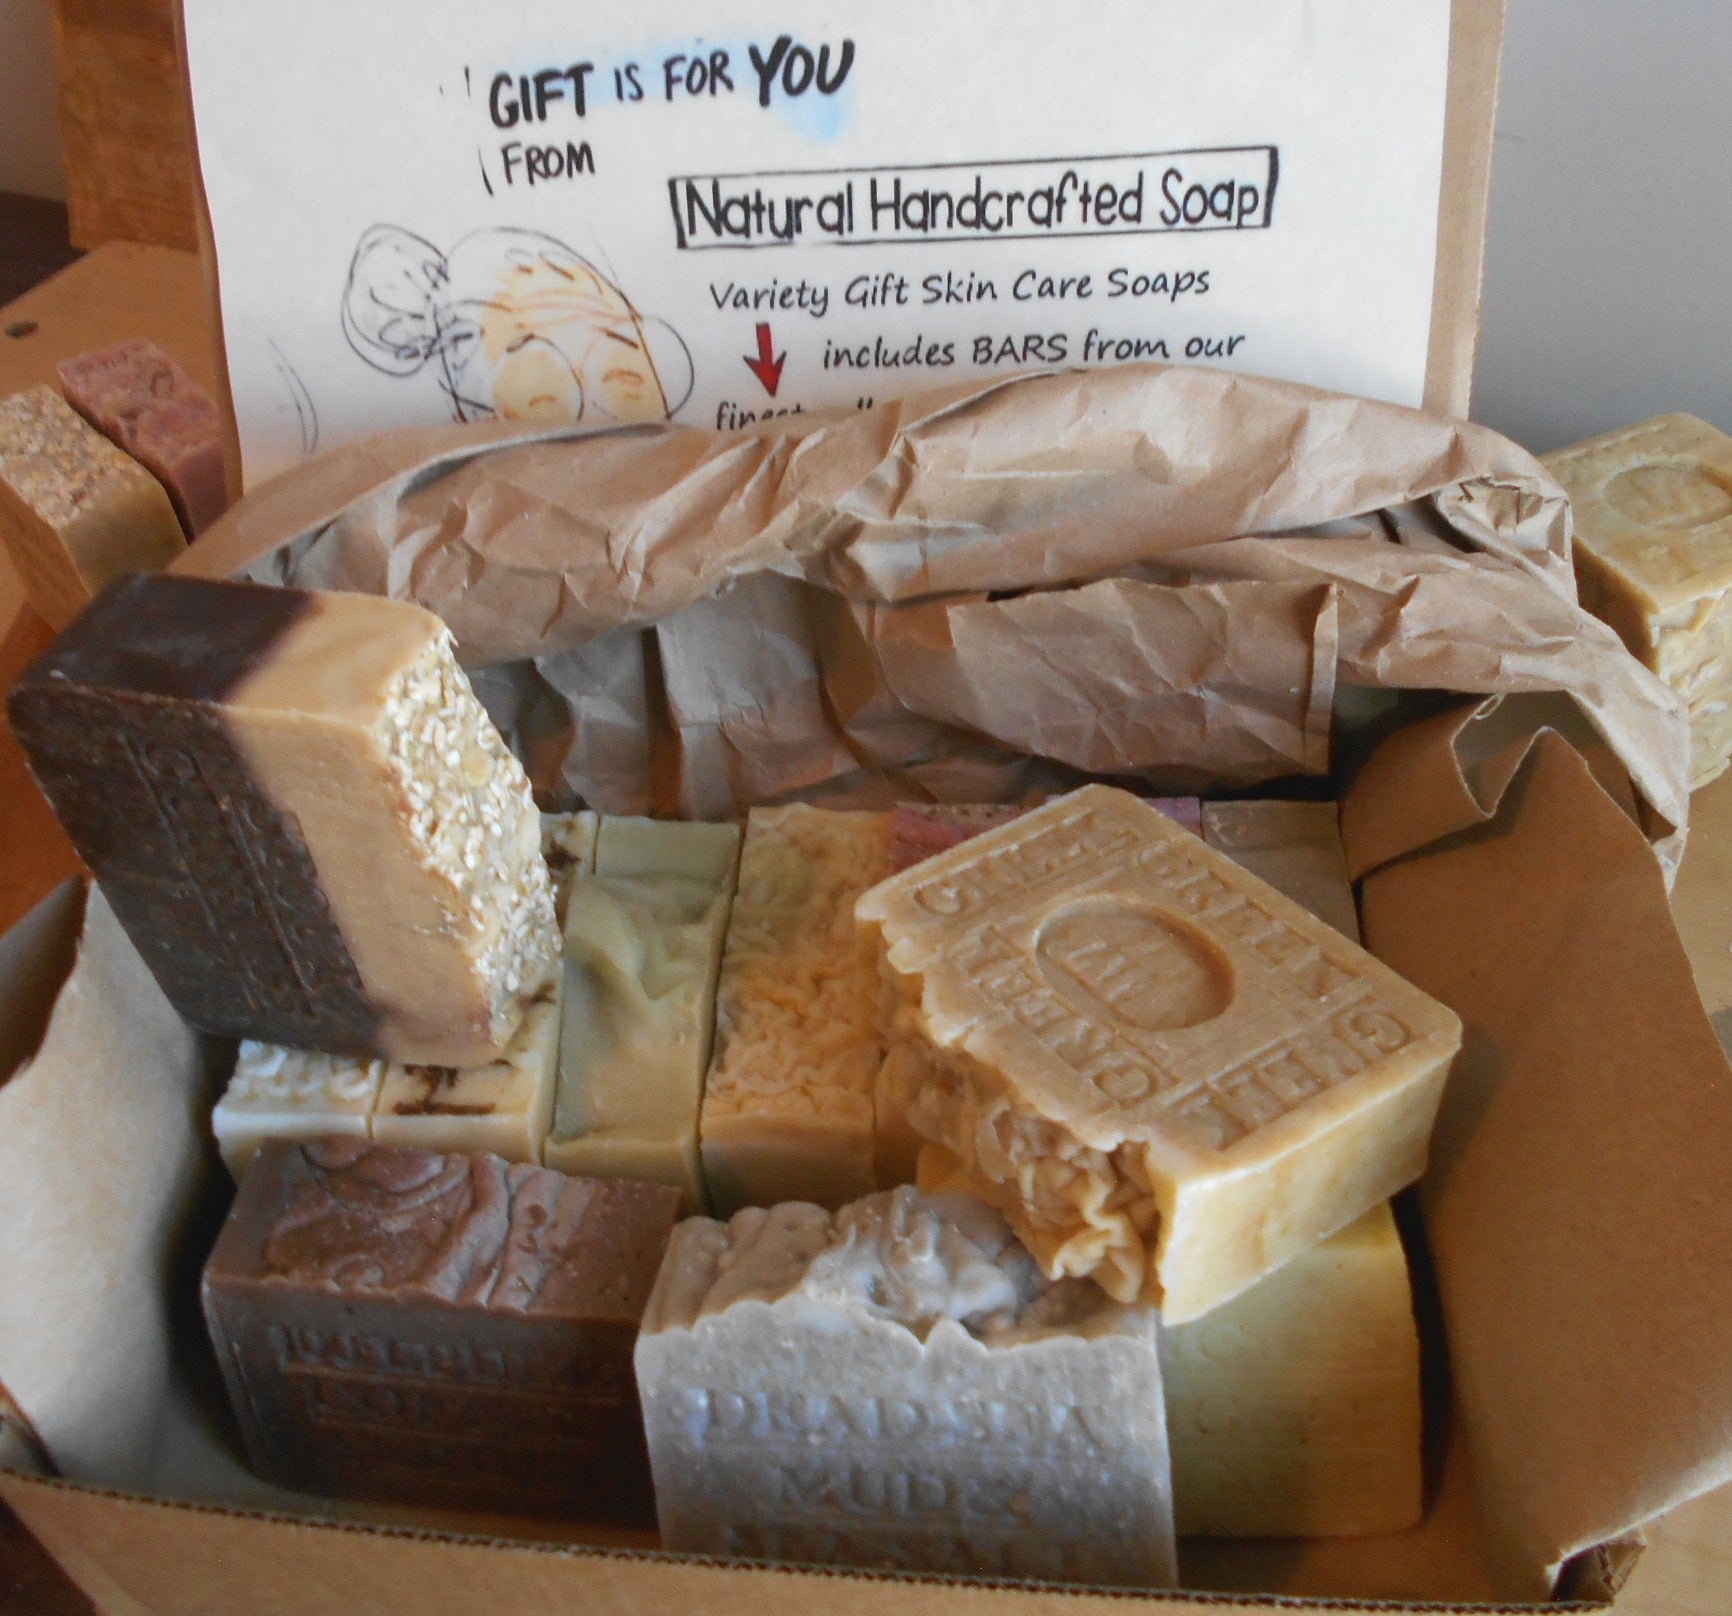 Soap Gift Sets Various Scents Available Handcrafted Soap Gifts Under 15  Dollars 